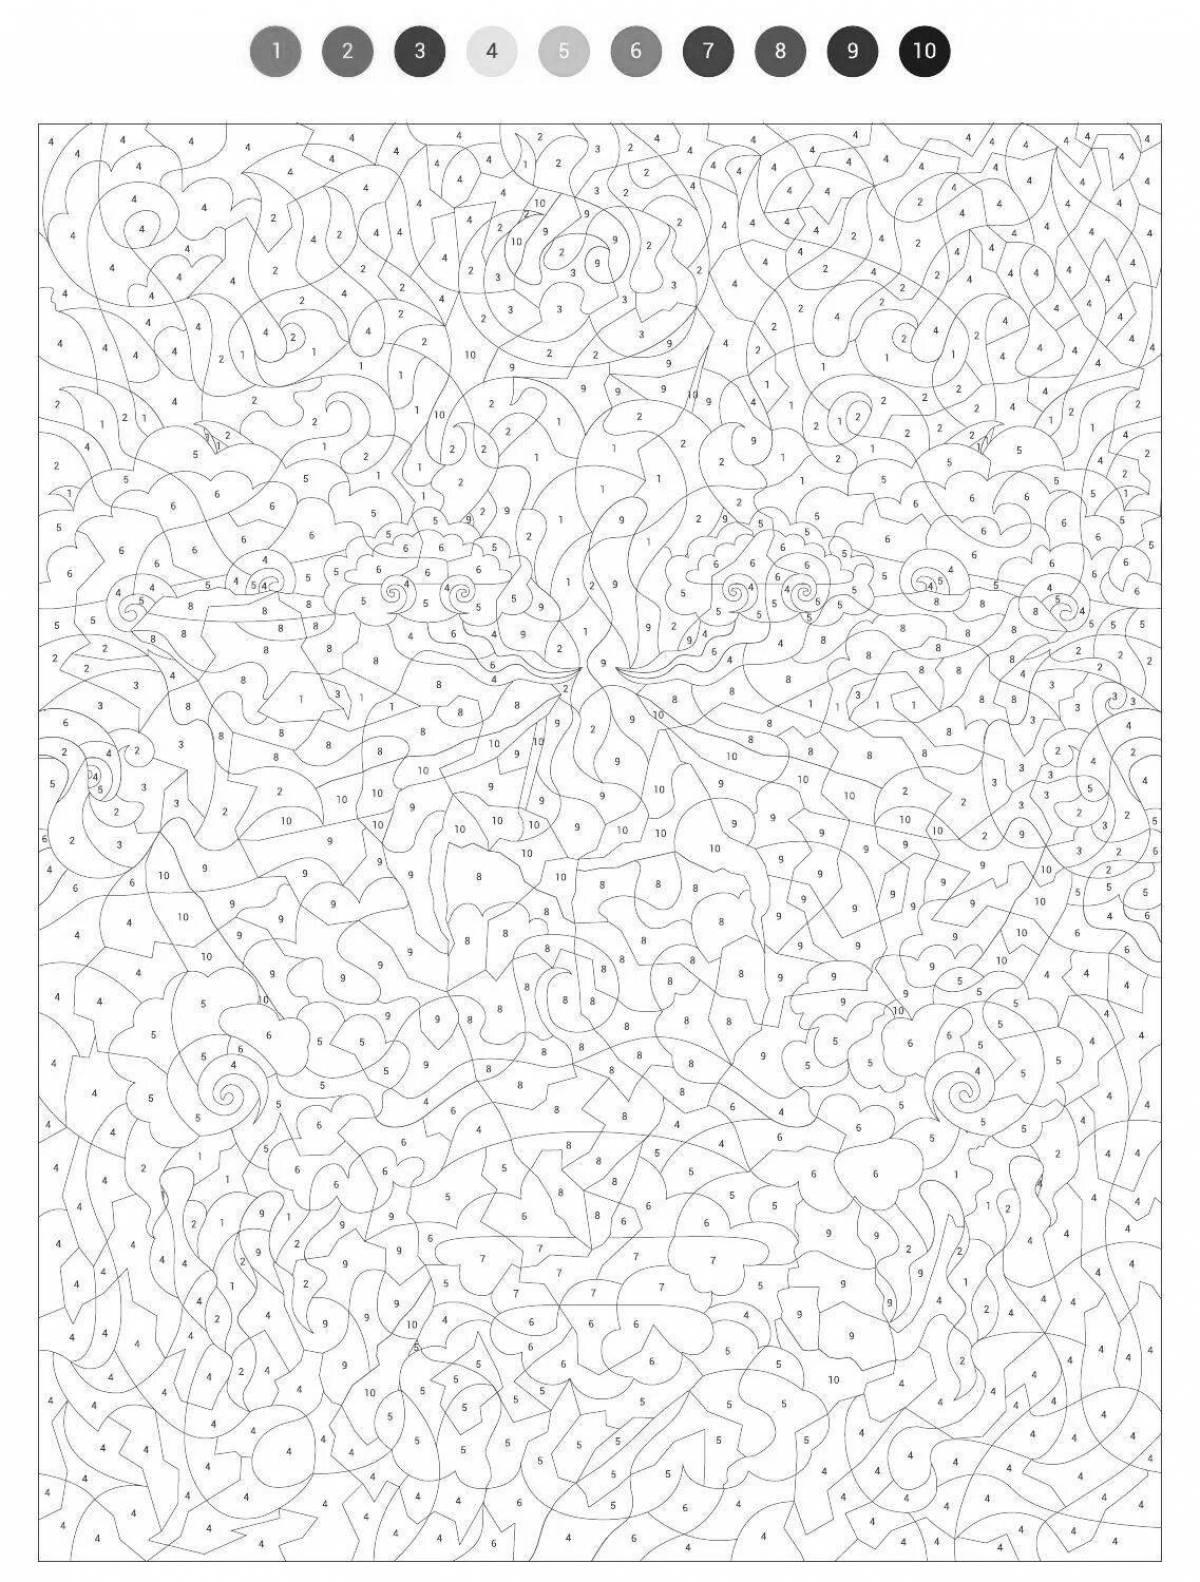 Creative adult coloring by numbers